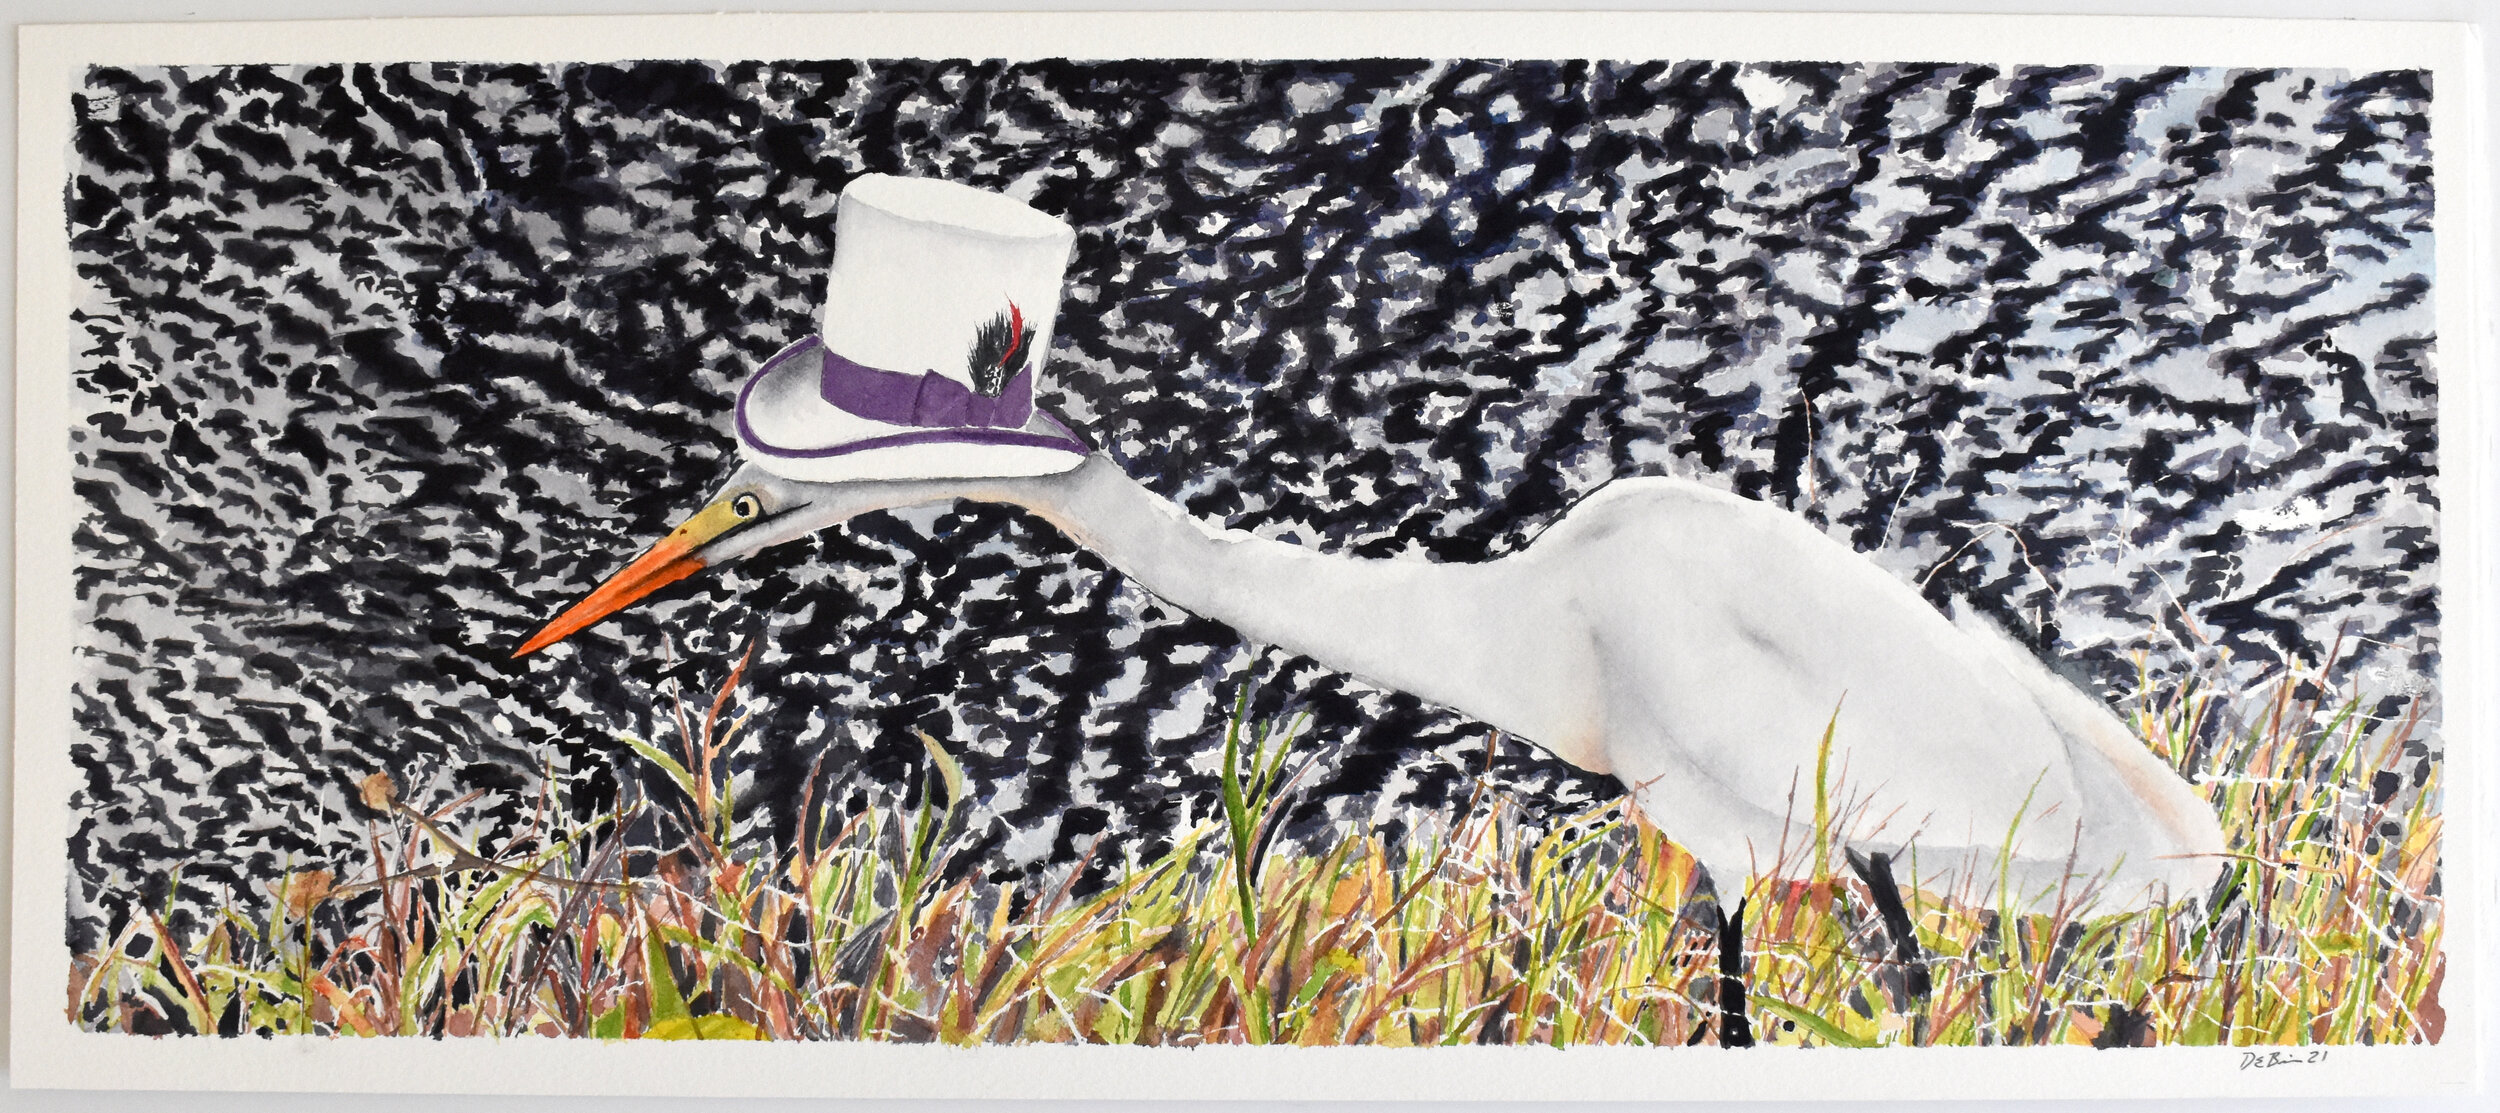 The Great Egret 22x15" on 140lb Lanaquarelle Paper